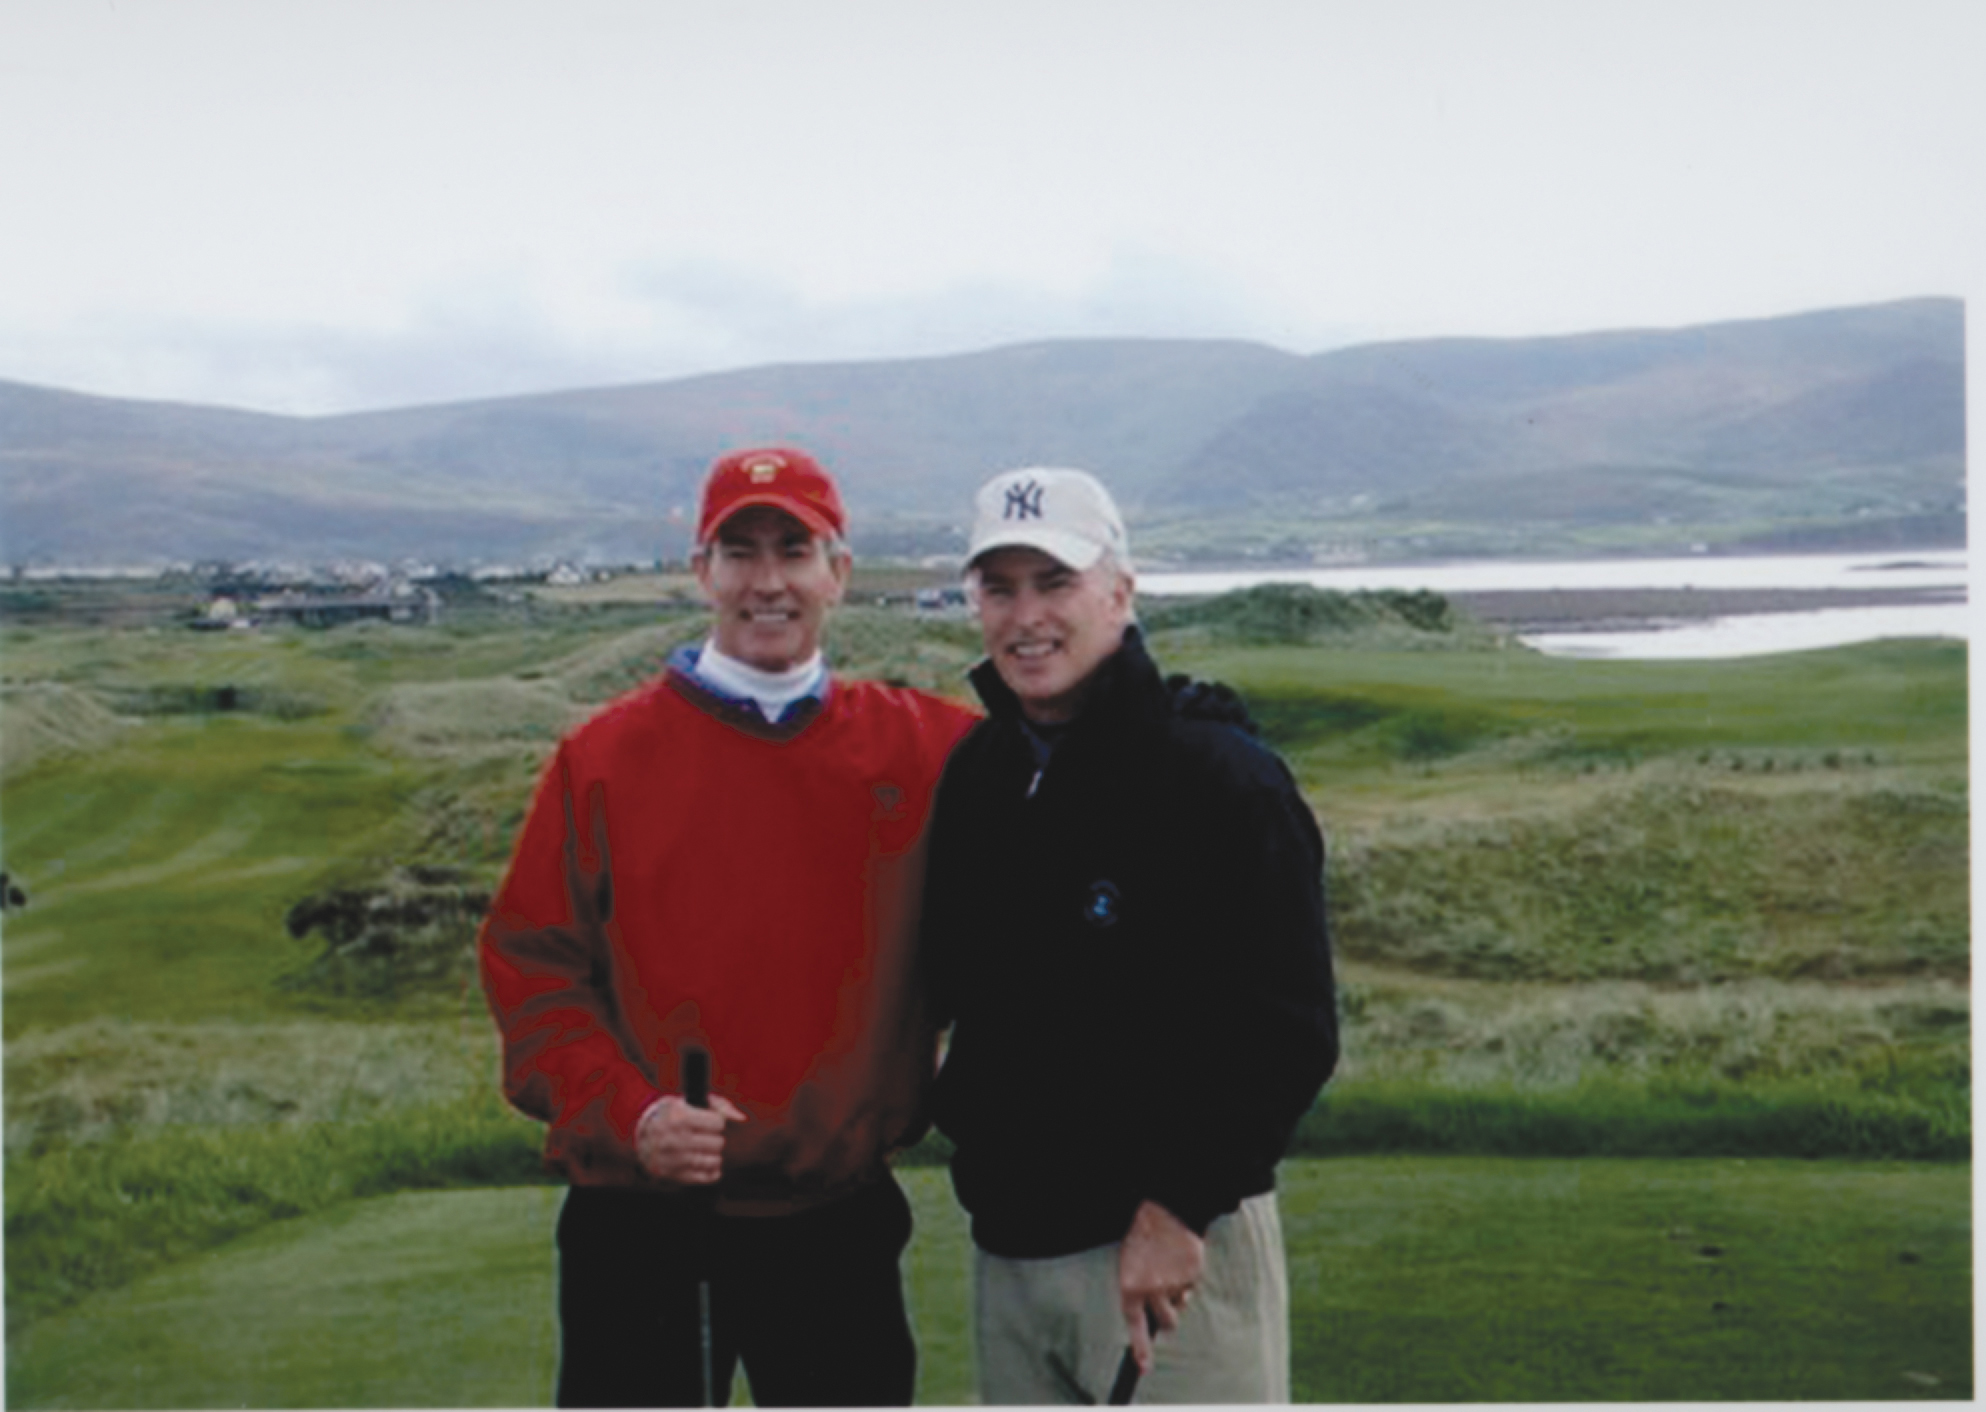 Bob (right) and Brian (left) McCann, his brother, at Waterville Golf Links in Ireland. (Photo courtesy Bob McCann)